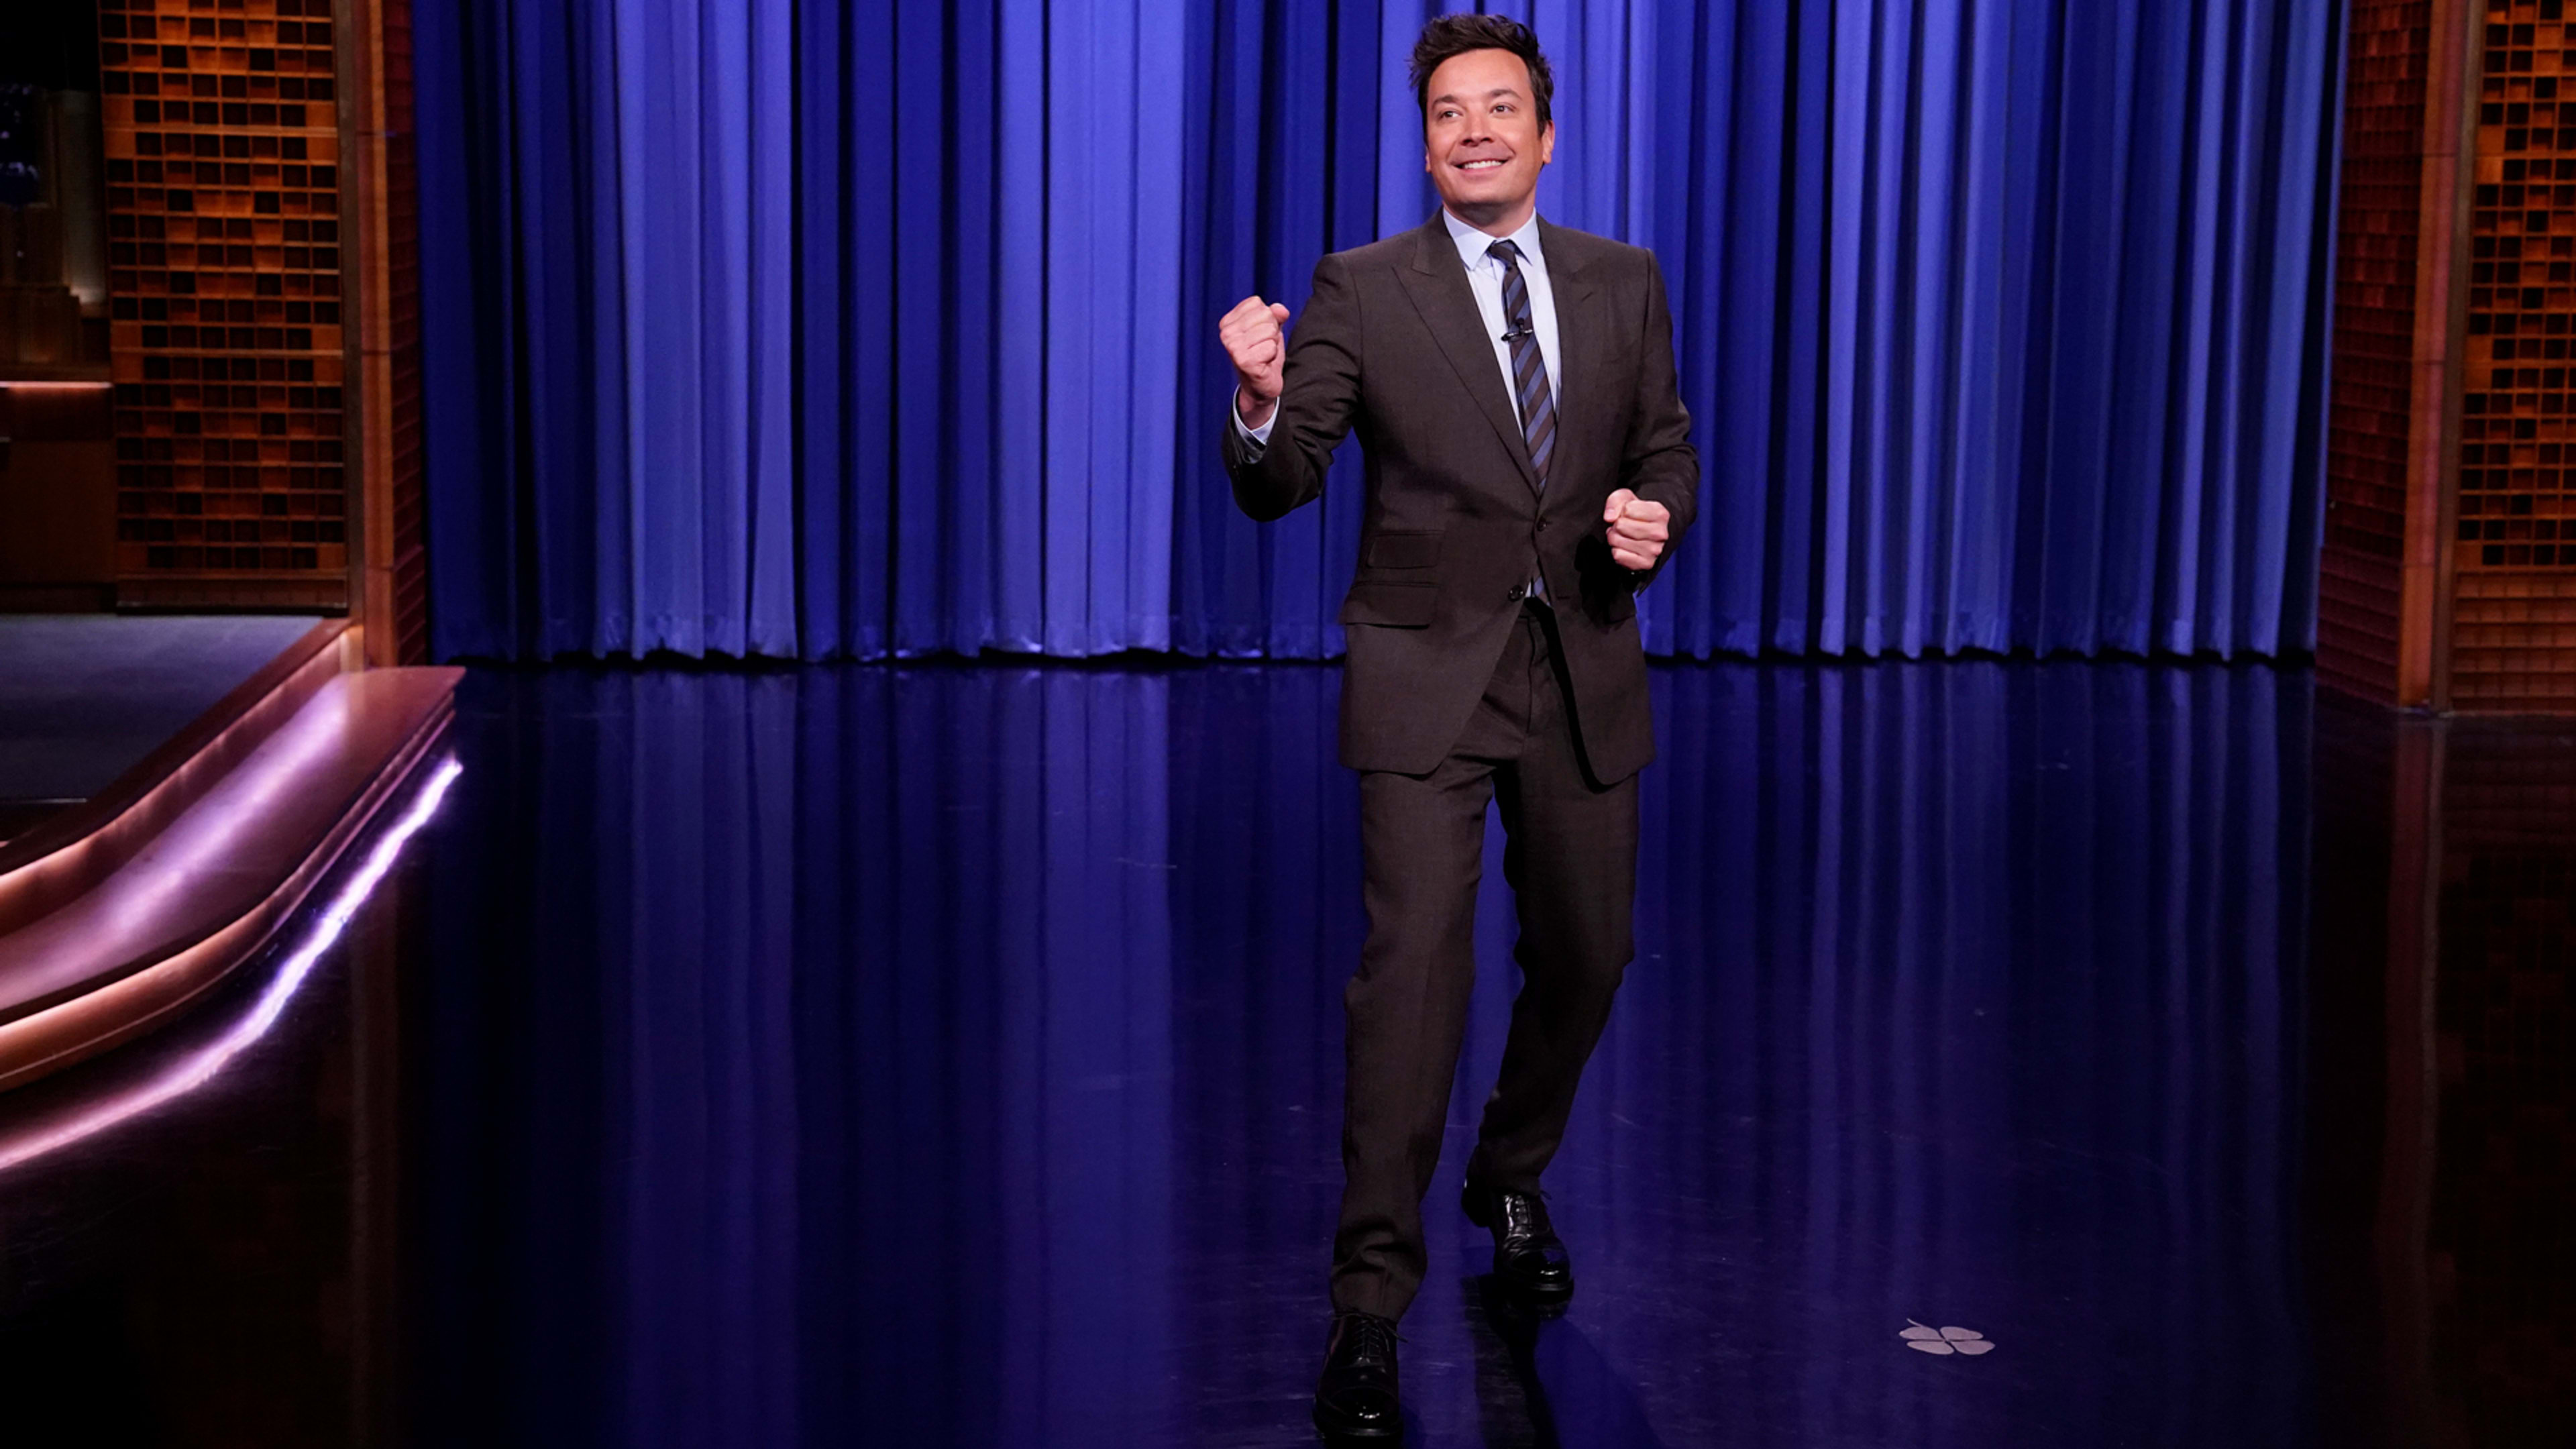 Jimmy Fallon responded perfectly to Trump’s salty tweet about him